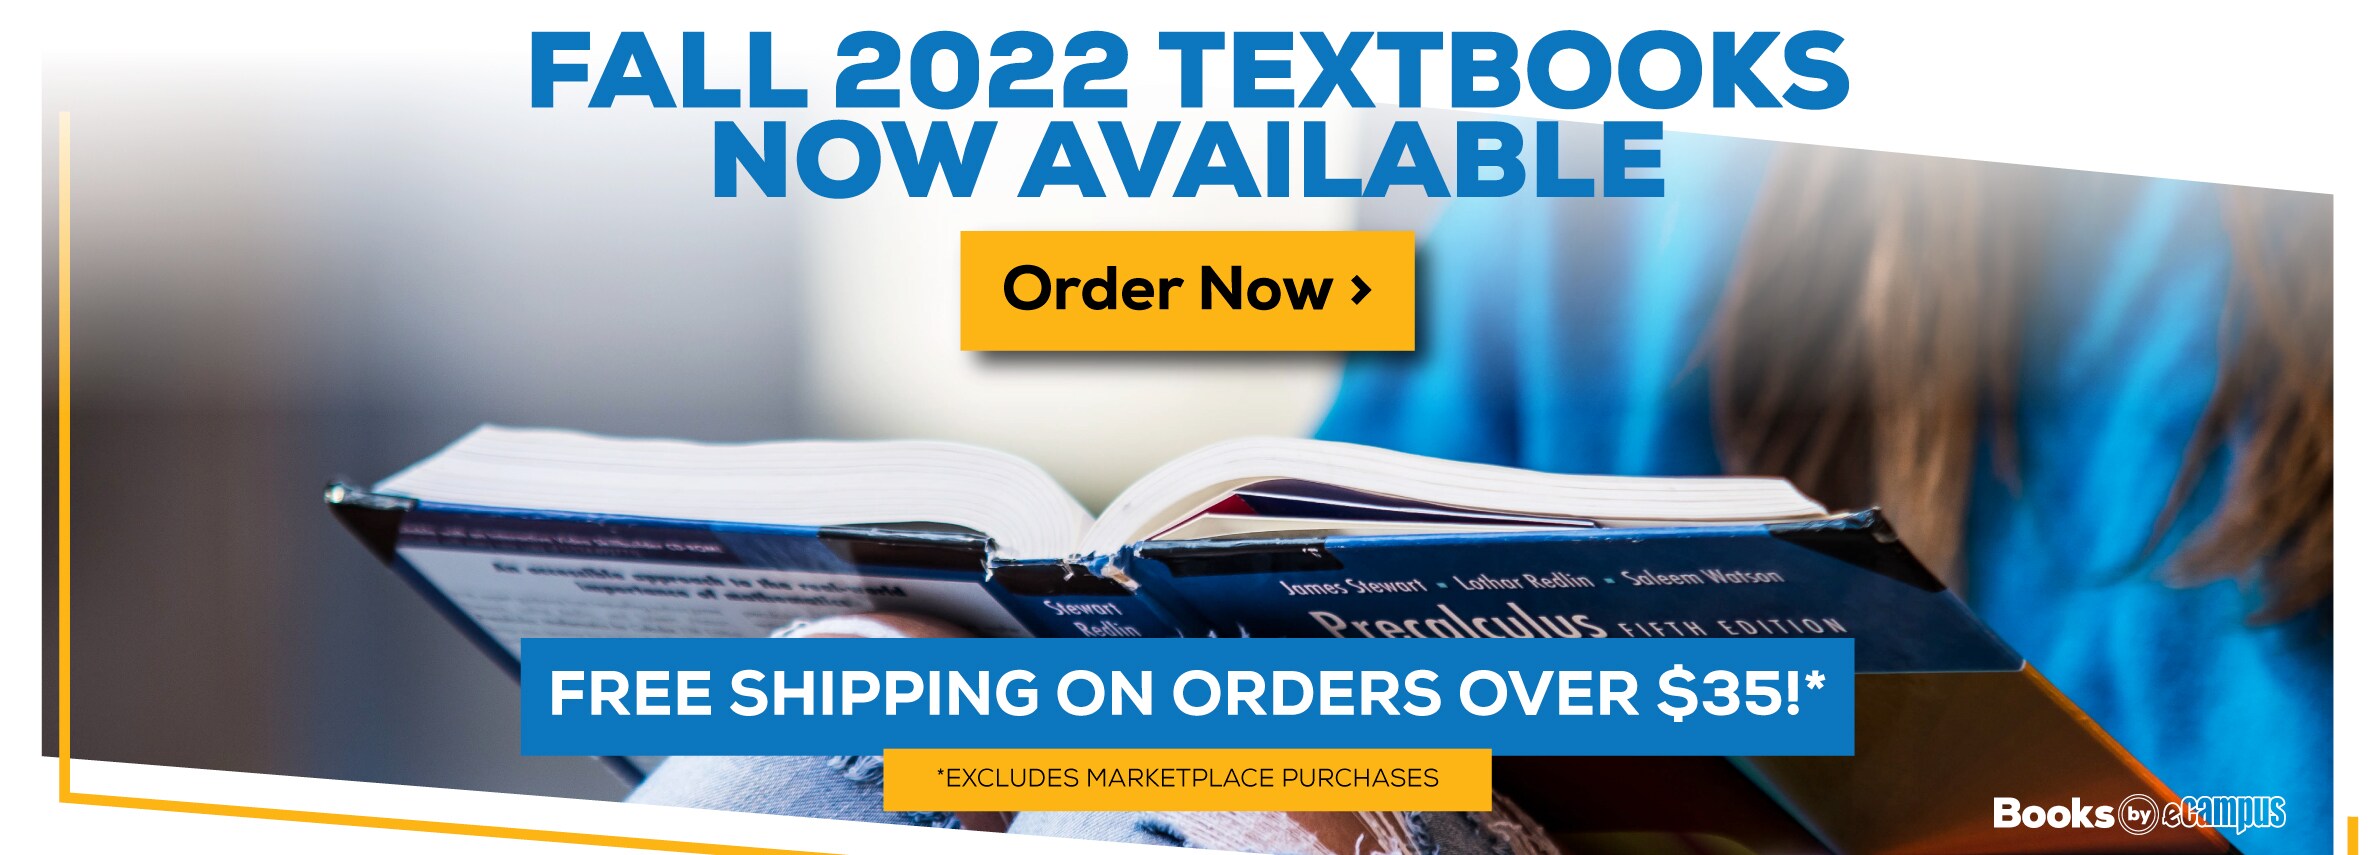 Fall 2022 Textbooks Now Available. Free shipping on orders over $35! Excludes marketplace purchases. Order Now.